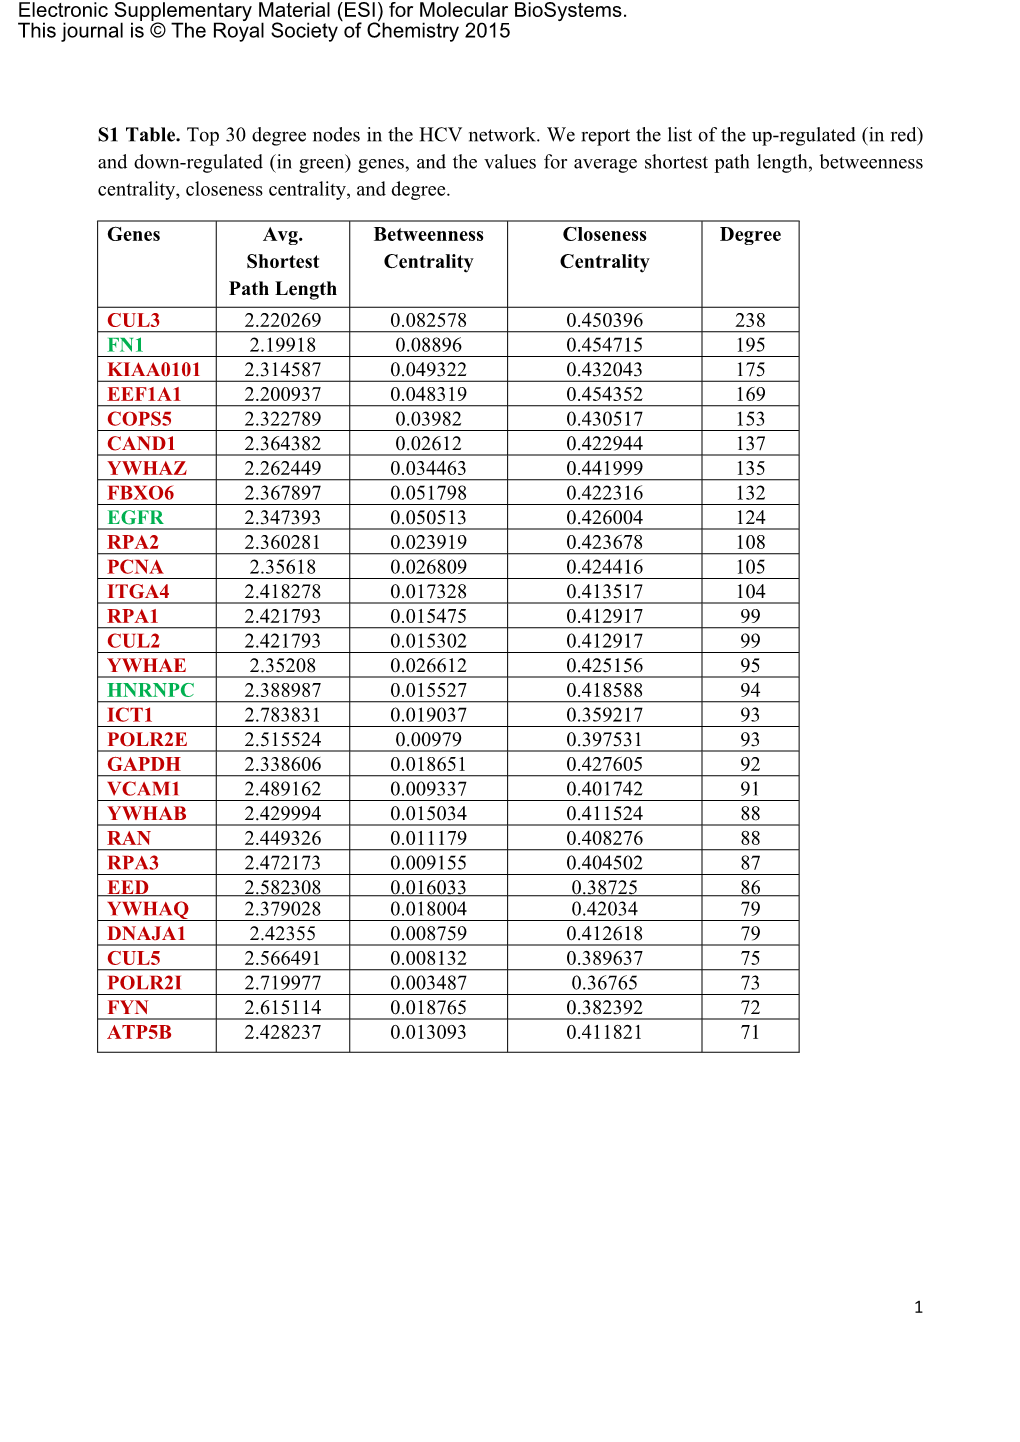 S1 Table. Top 30 Degree Nodes in the HCV Network. We Report The